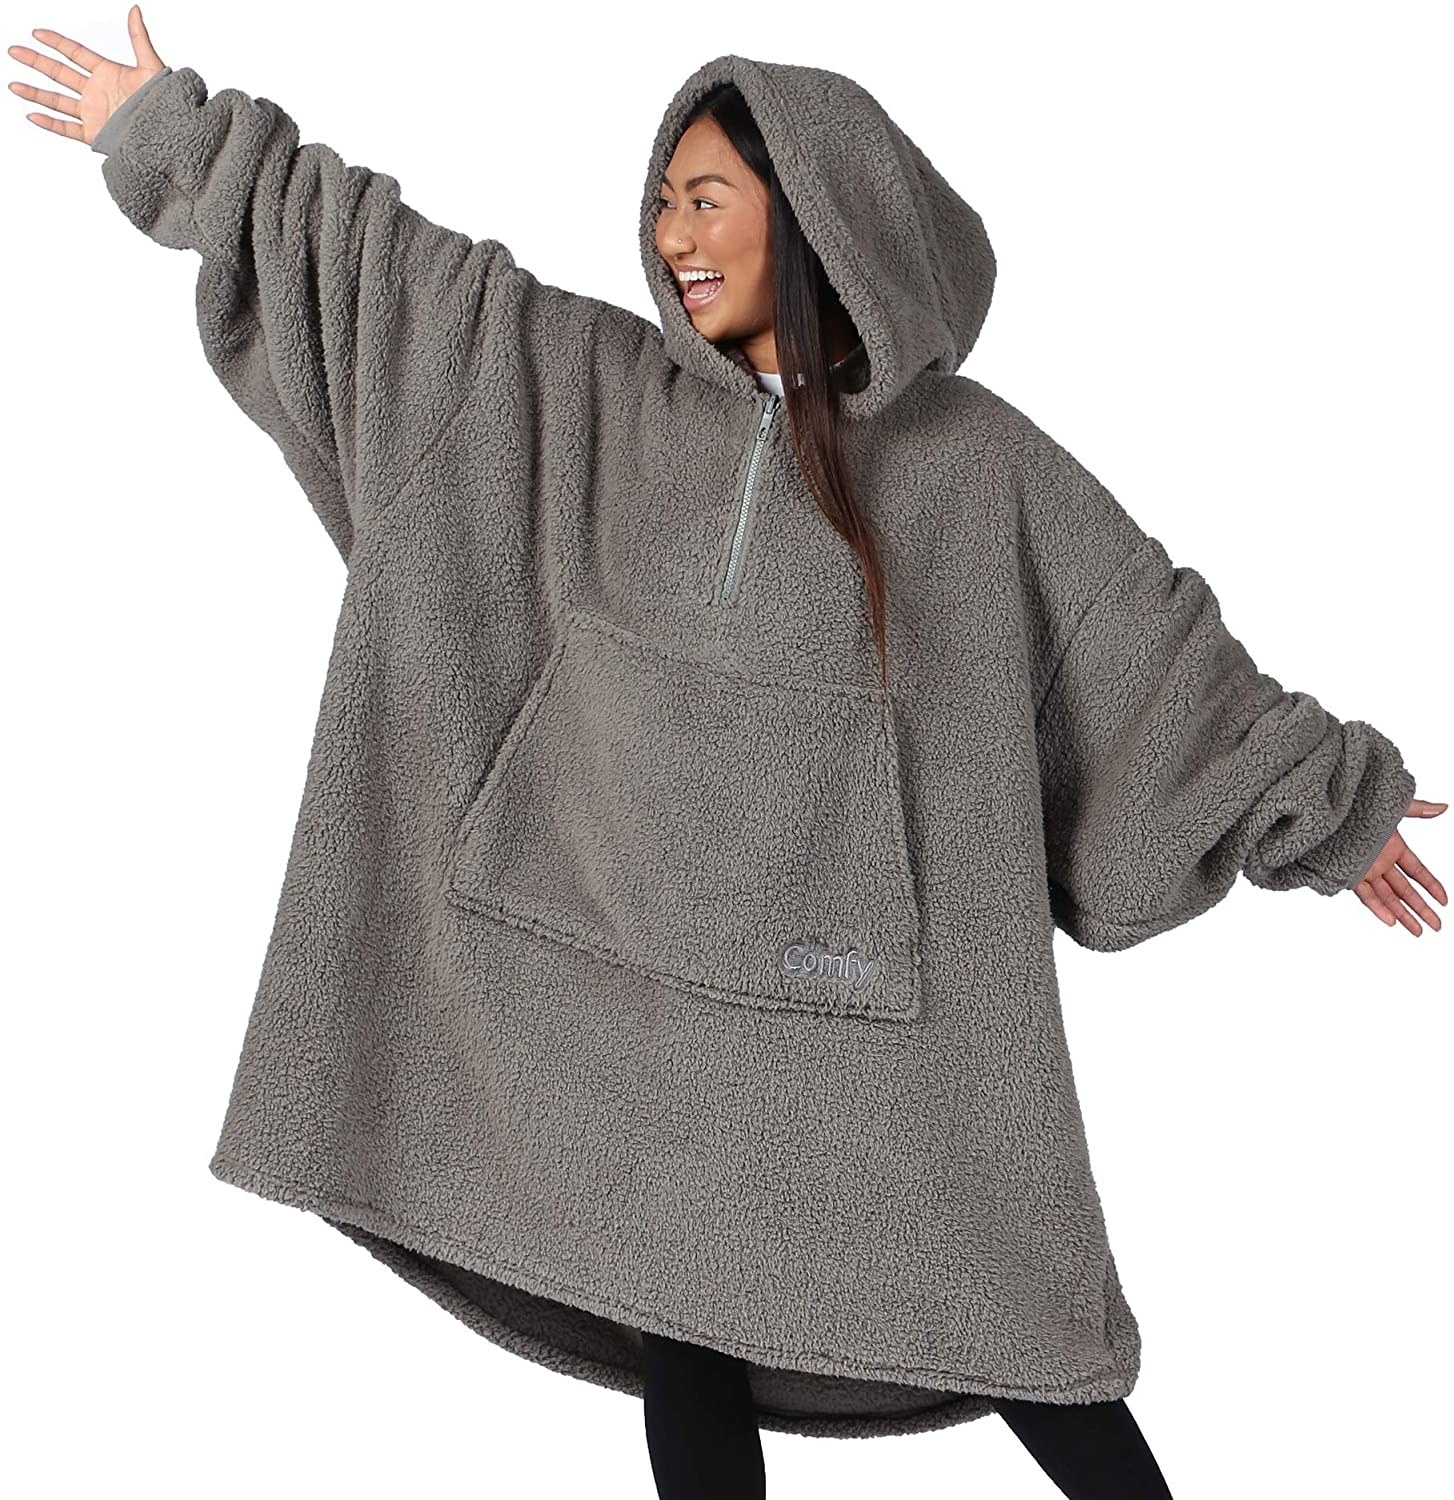 A person wearing an oversized hoodie